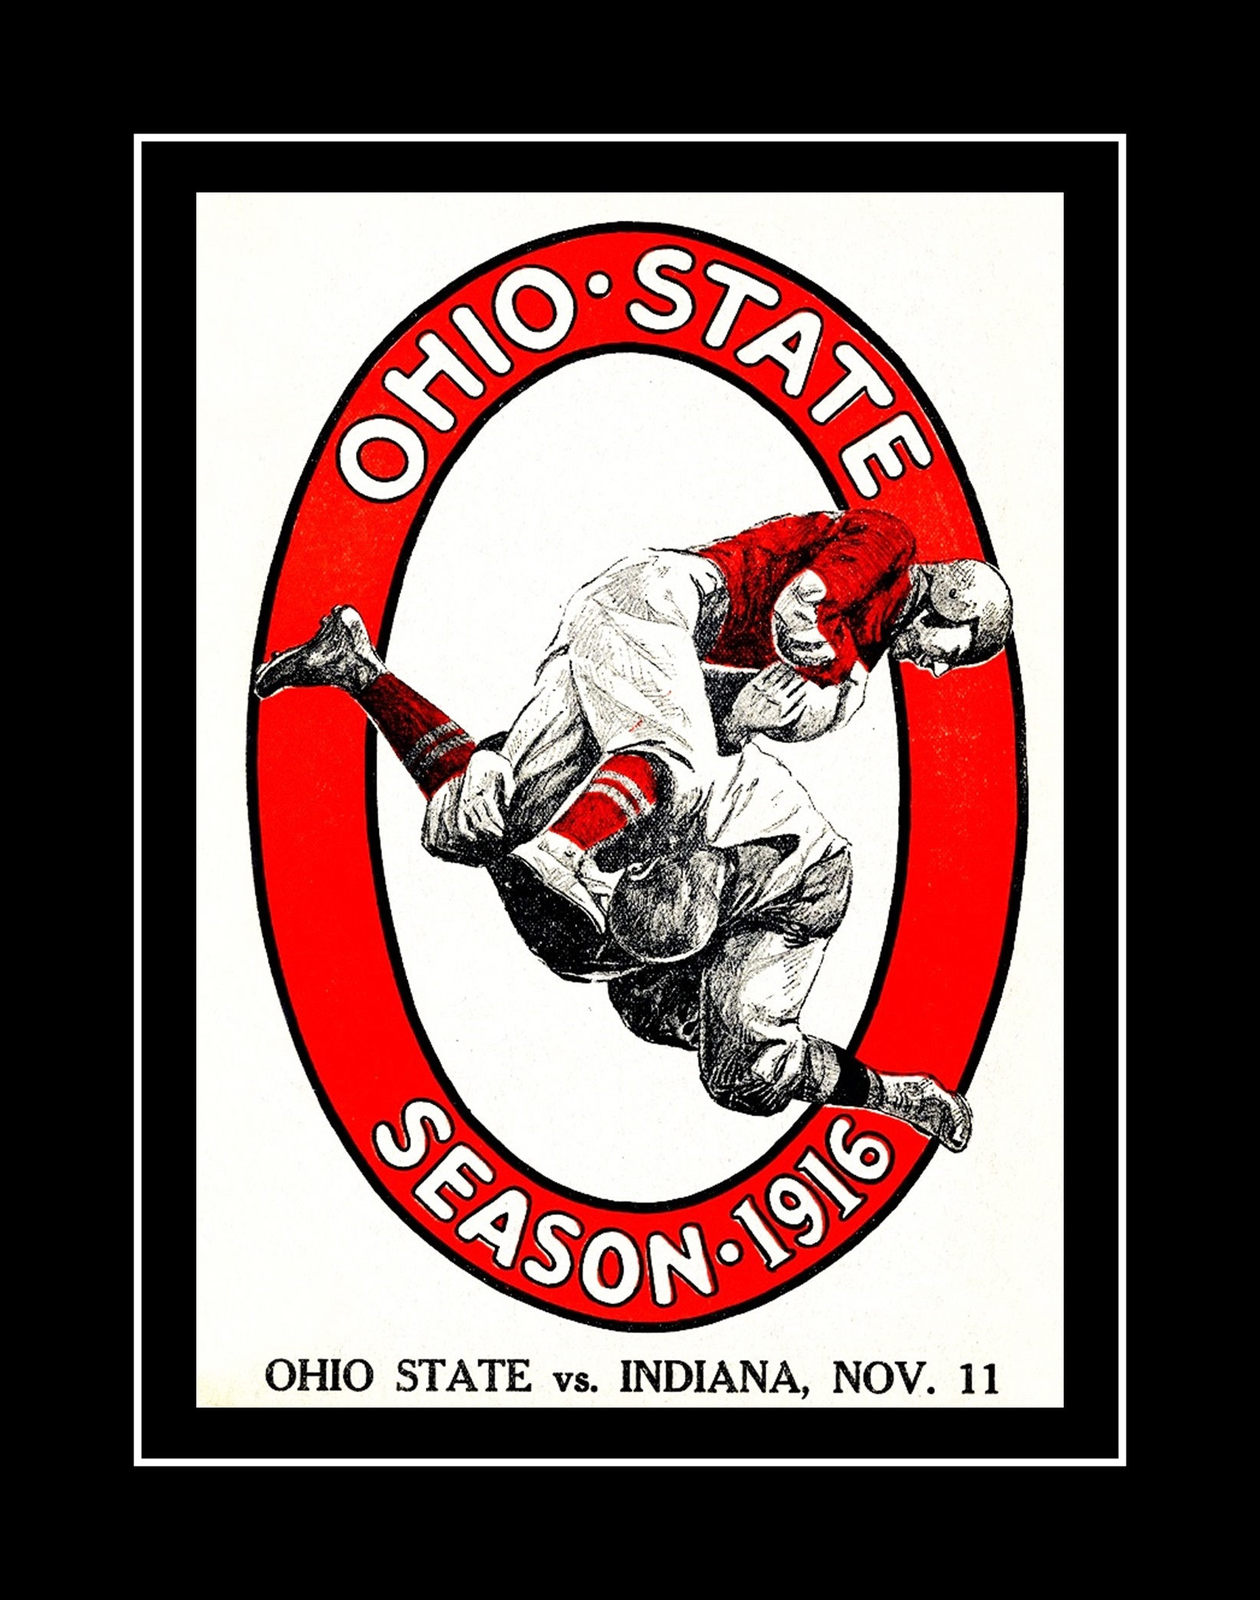 Vintage 1916 Ohio State Buckeyes Football Poster Print Unique Gift - $19.99 - $39.99